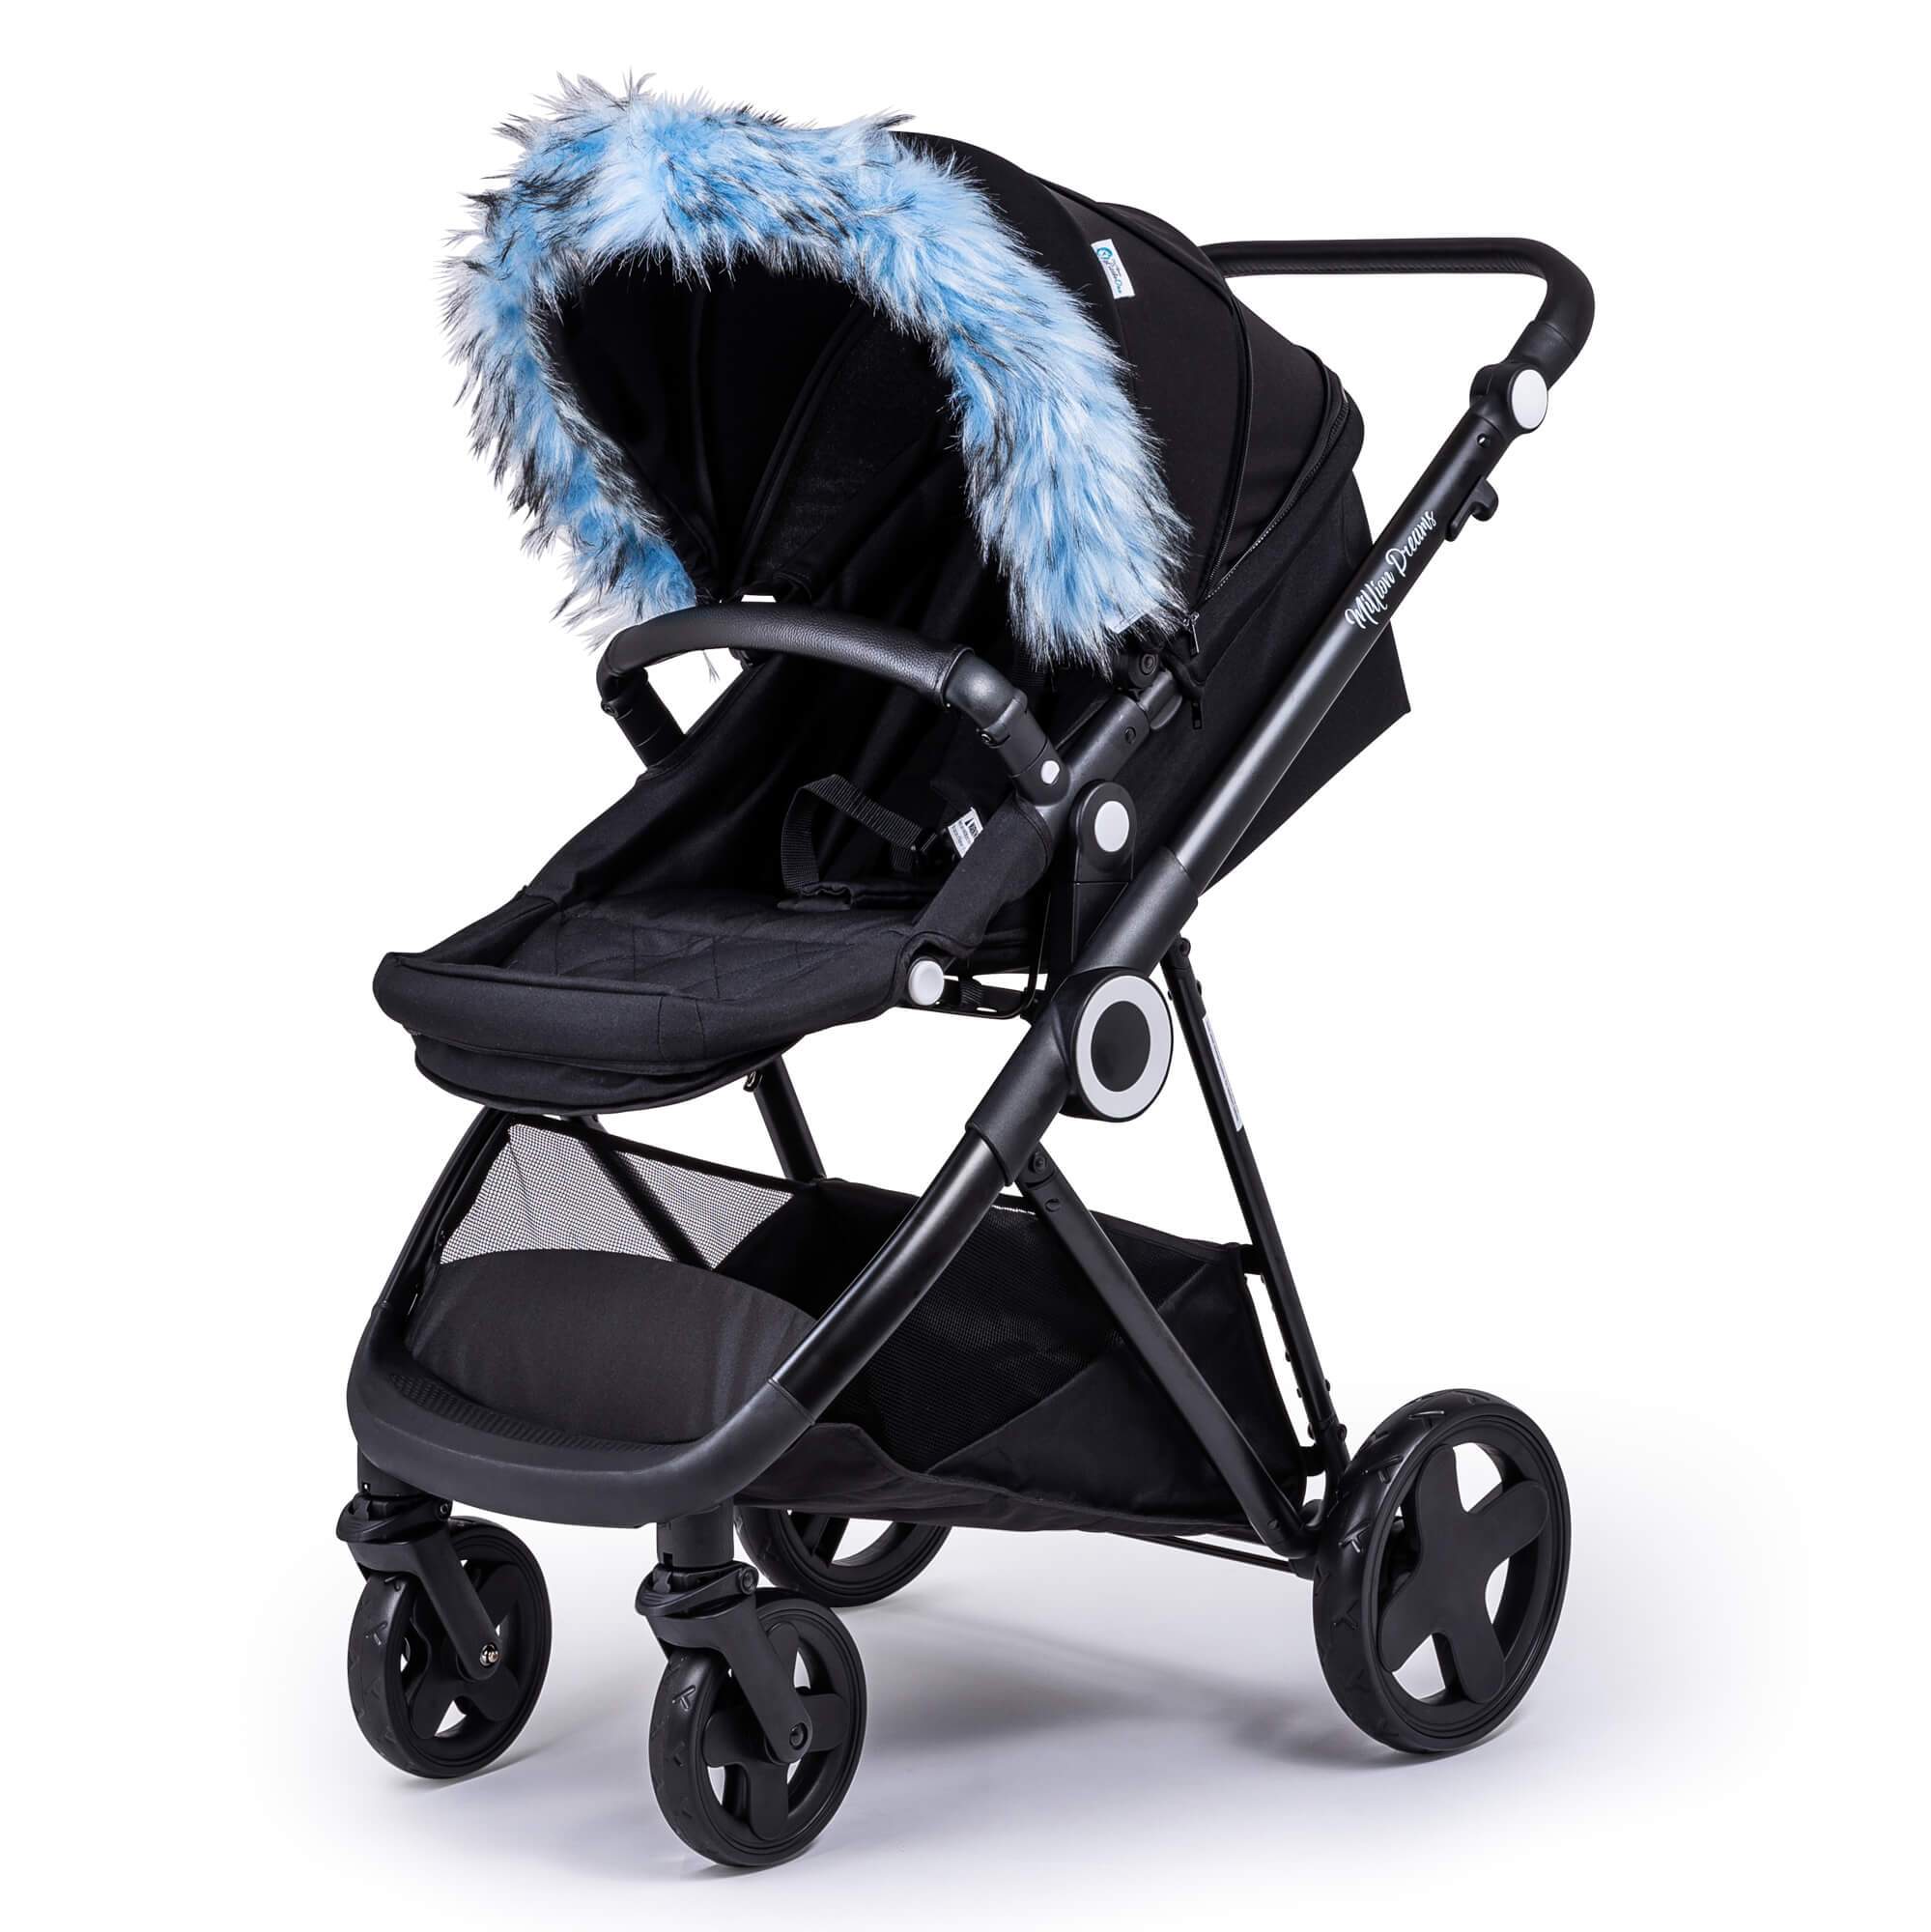 Pram Fur Hood Trim Attachment for Pushchair Compatible with Urban Detour - Light Blue / Fits All Models | For Your Little One